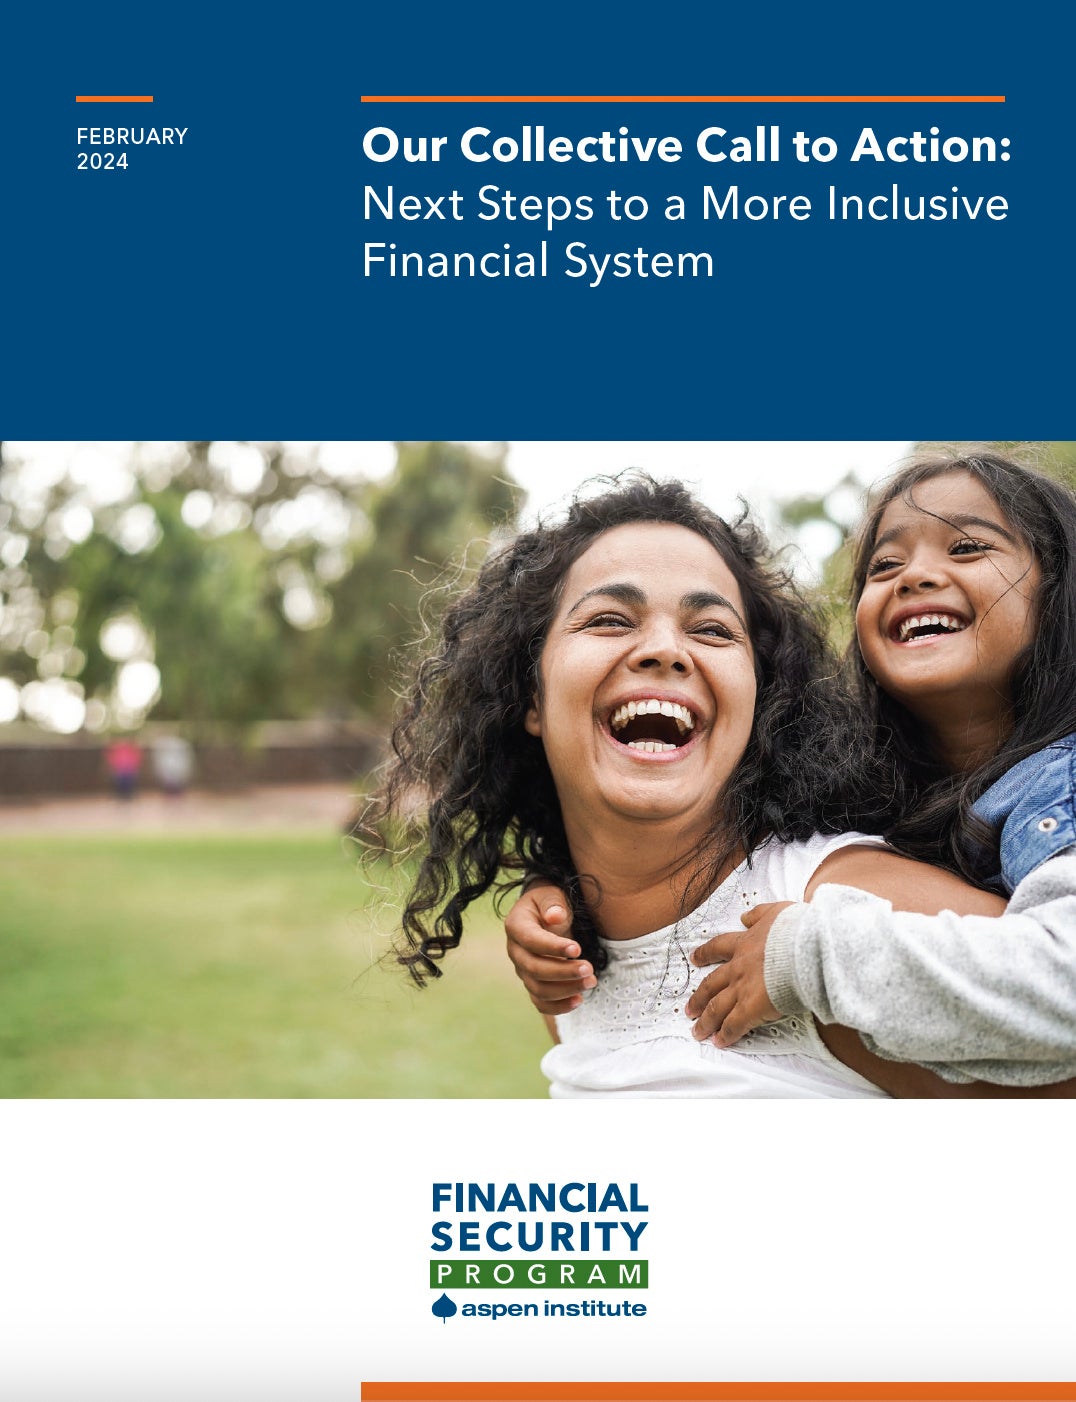 Next Steps to a More Inclusive Financial System